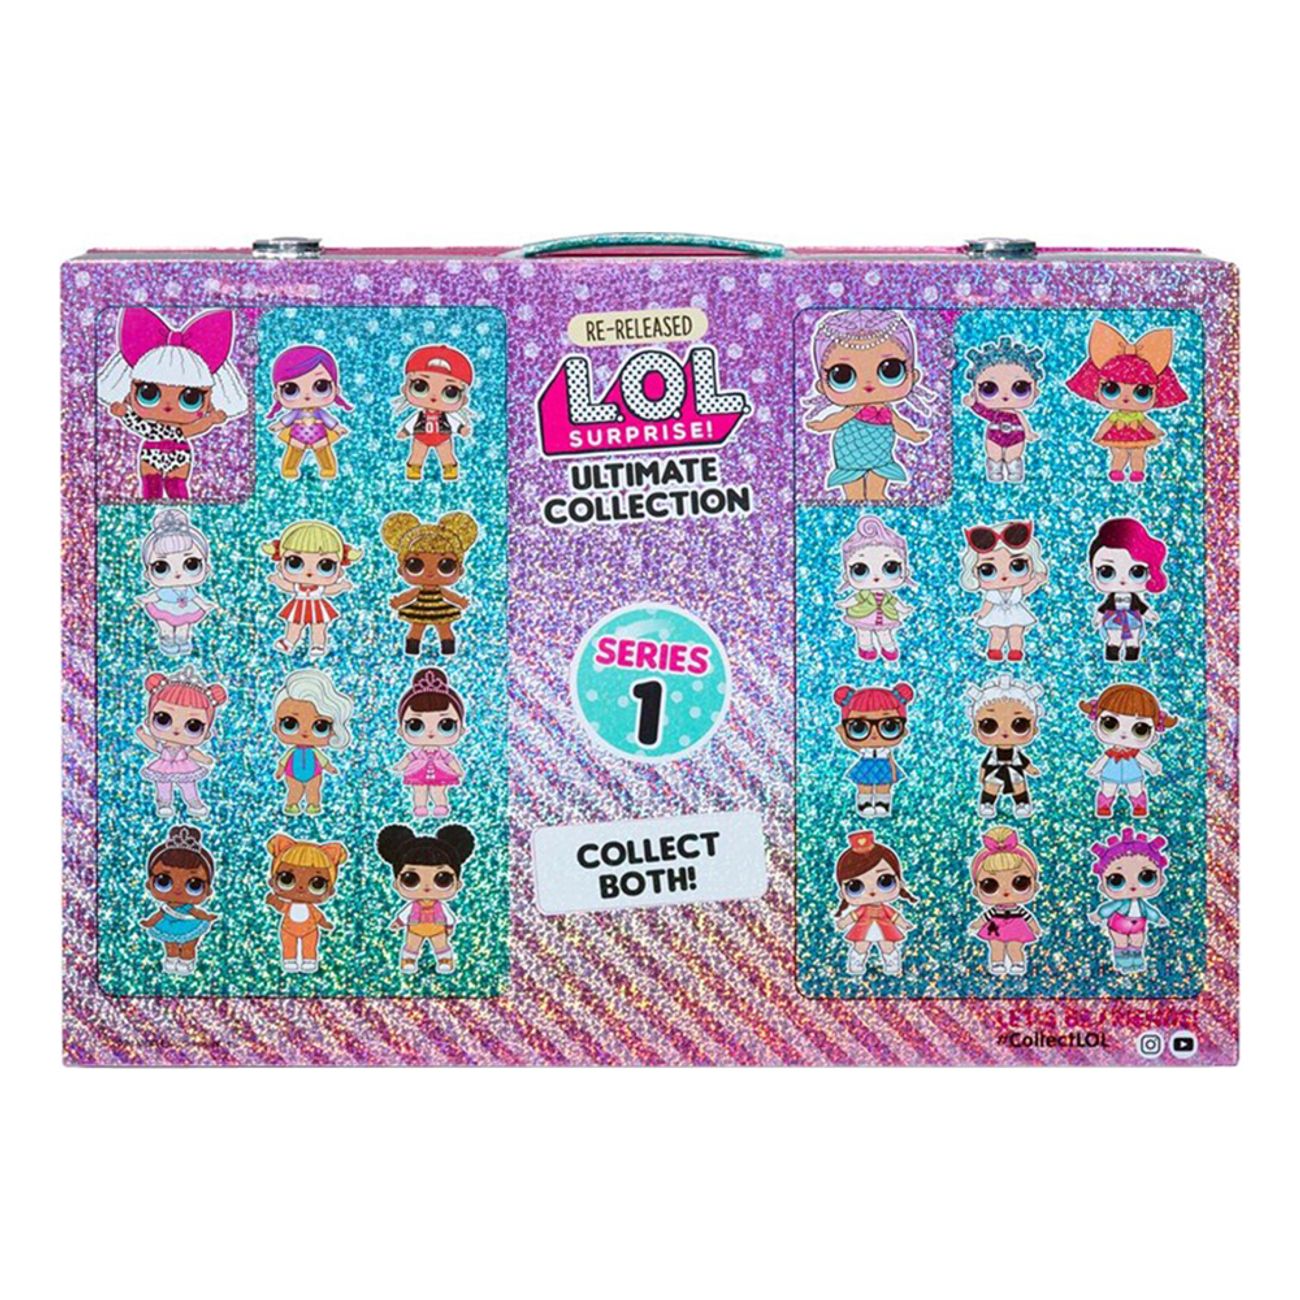 lol-limited-edition-surprise-complete-collectionseries-1b-merbaby-2